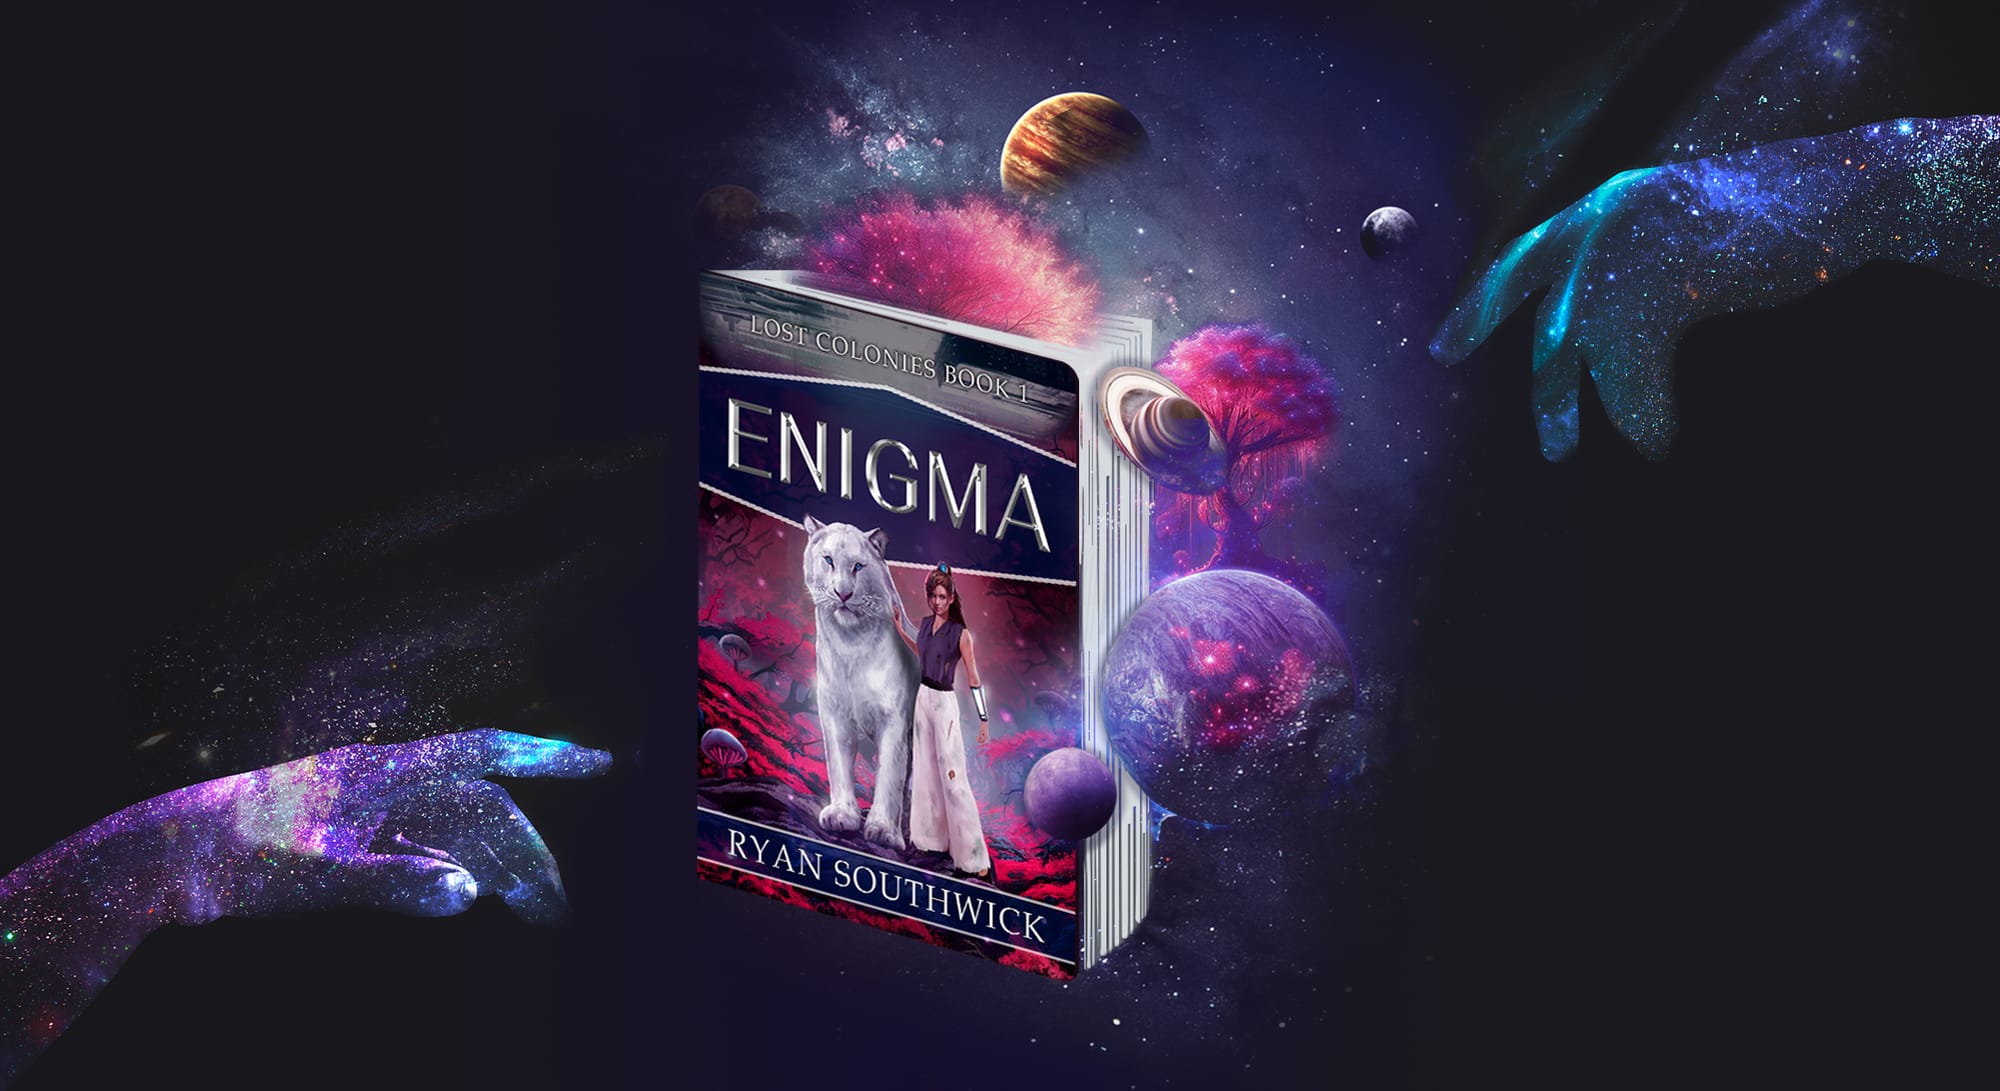 Book "Enigma by Ryan Southwick" floating in space amidst planets and ancient, alien trees